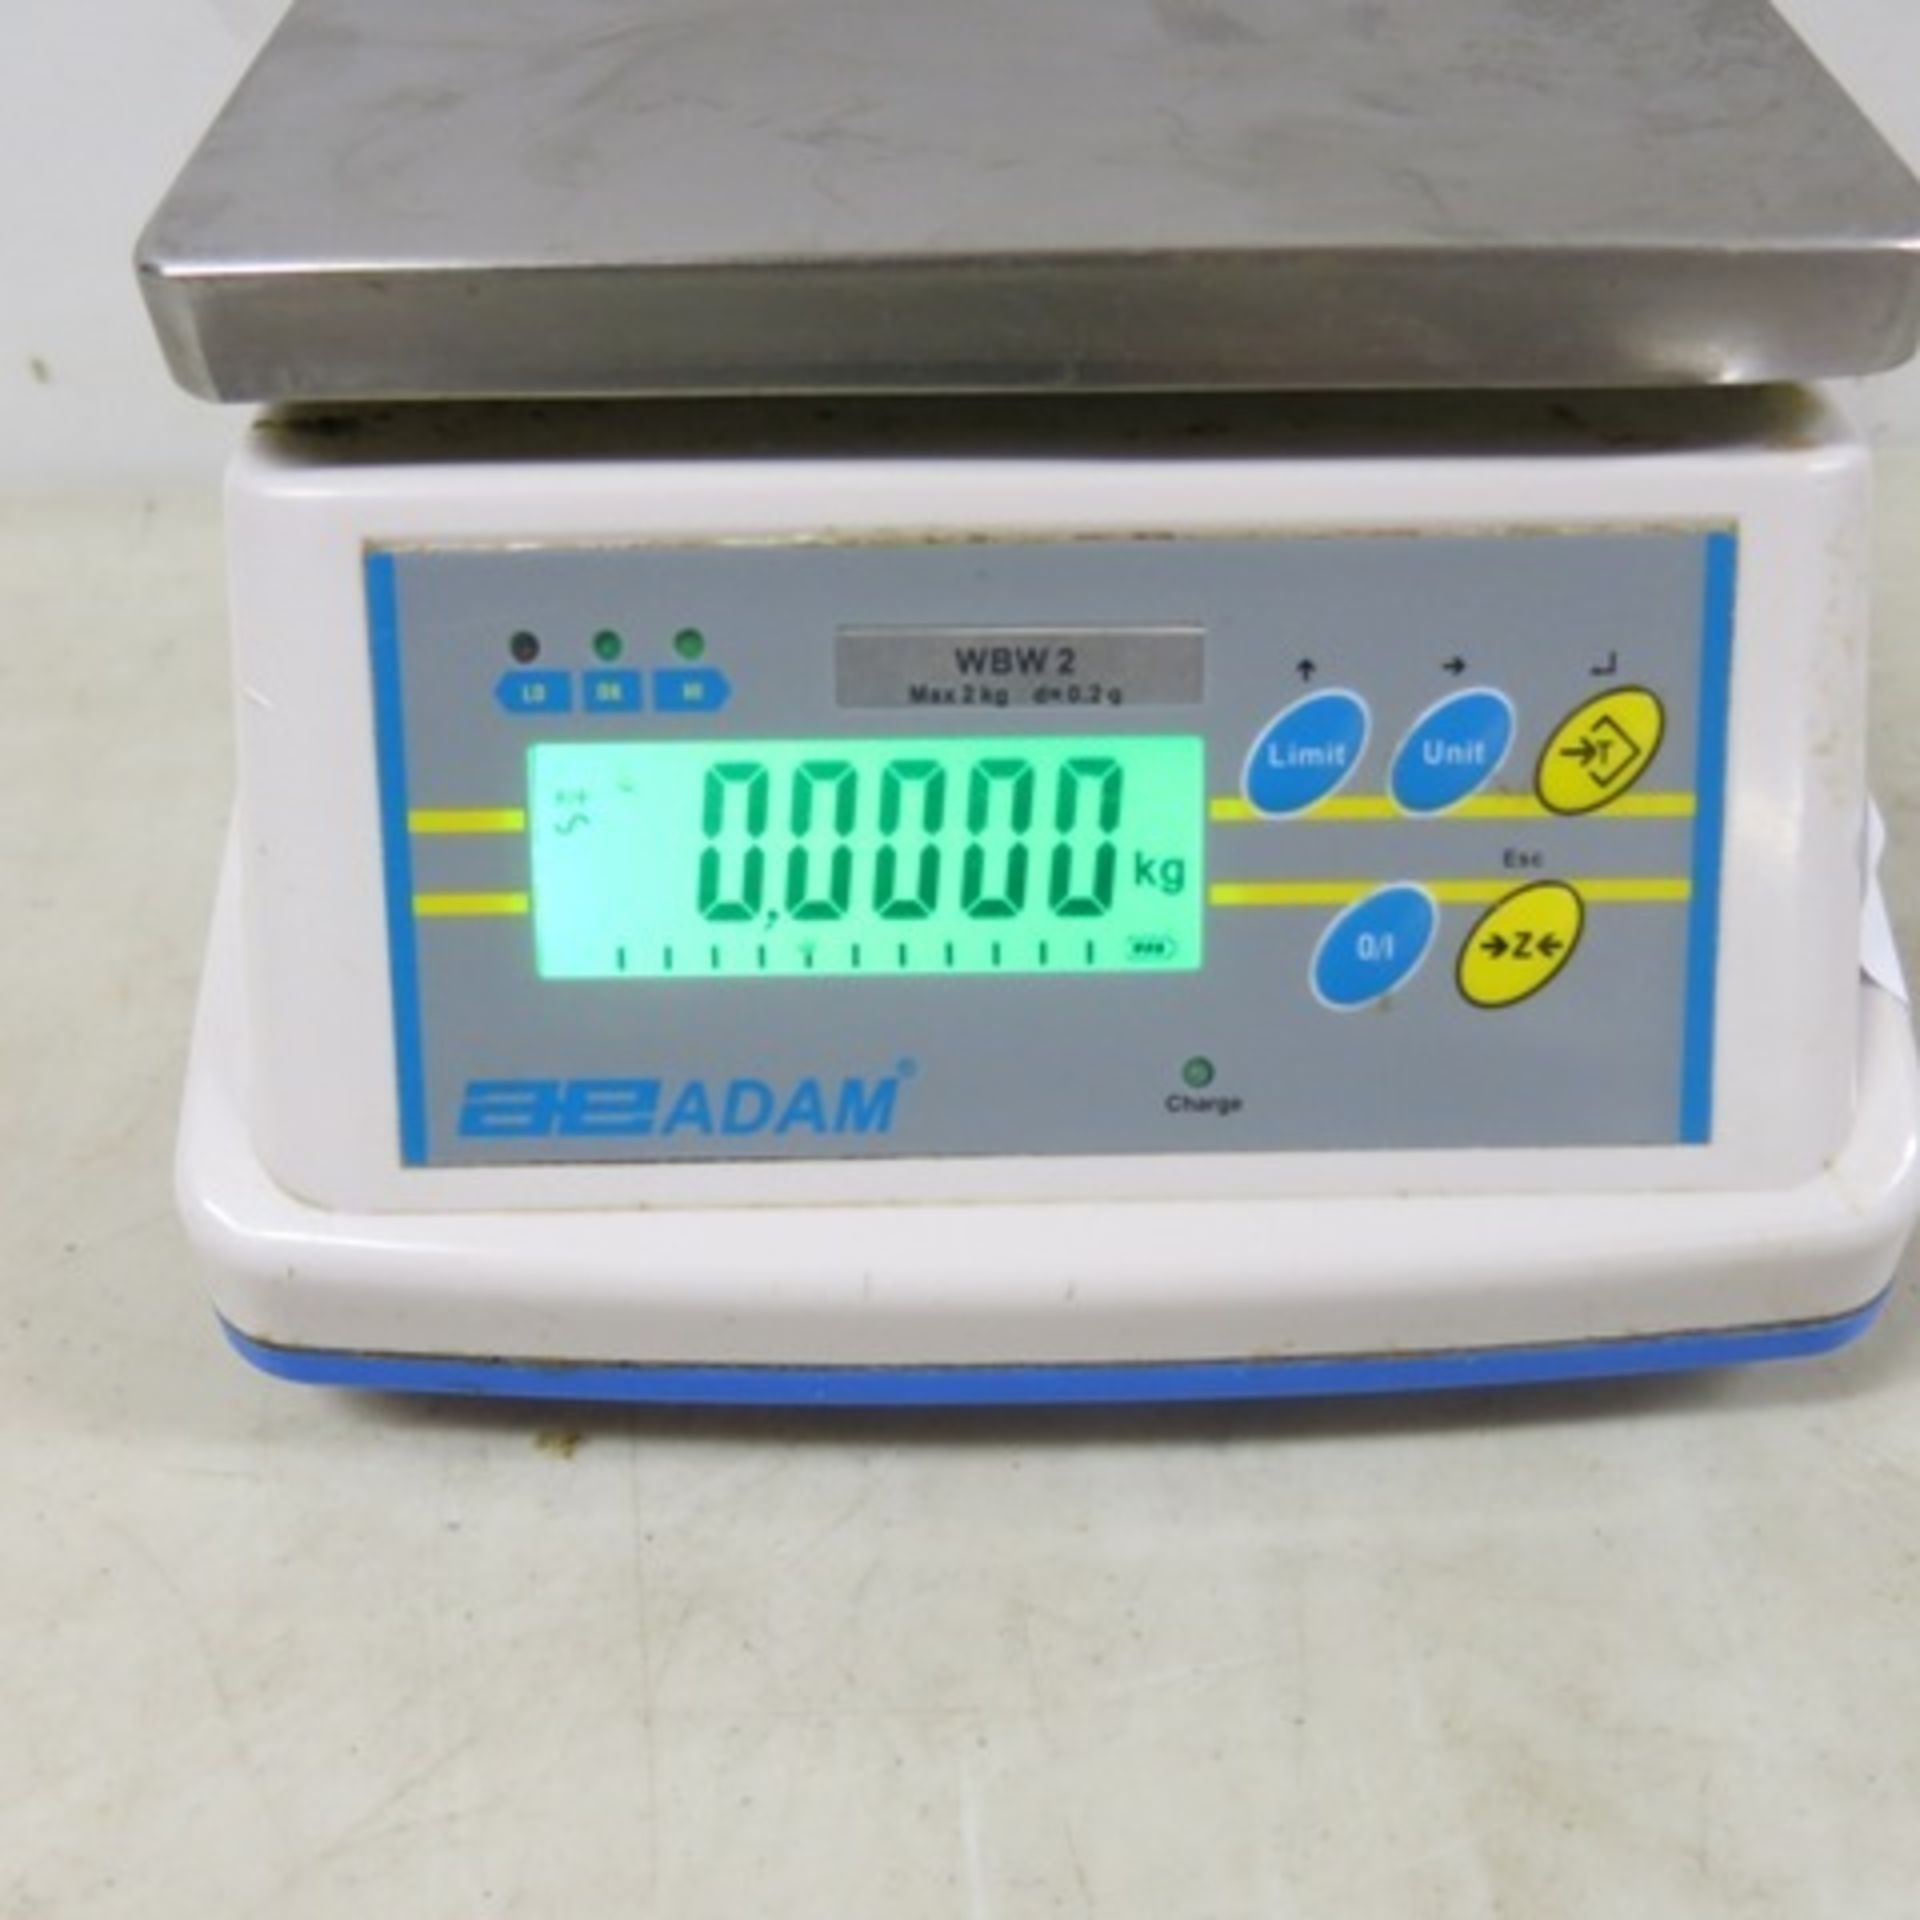 Adam WBW 2 Retail Scales Up to 2kg Capacity. - Image 2 of 4